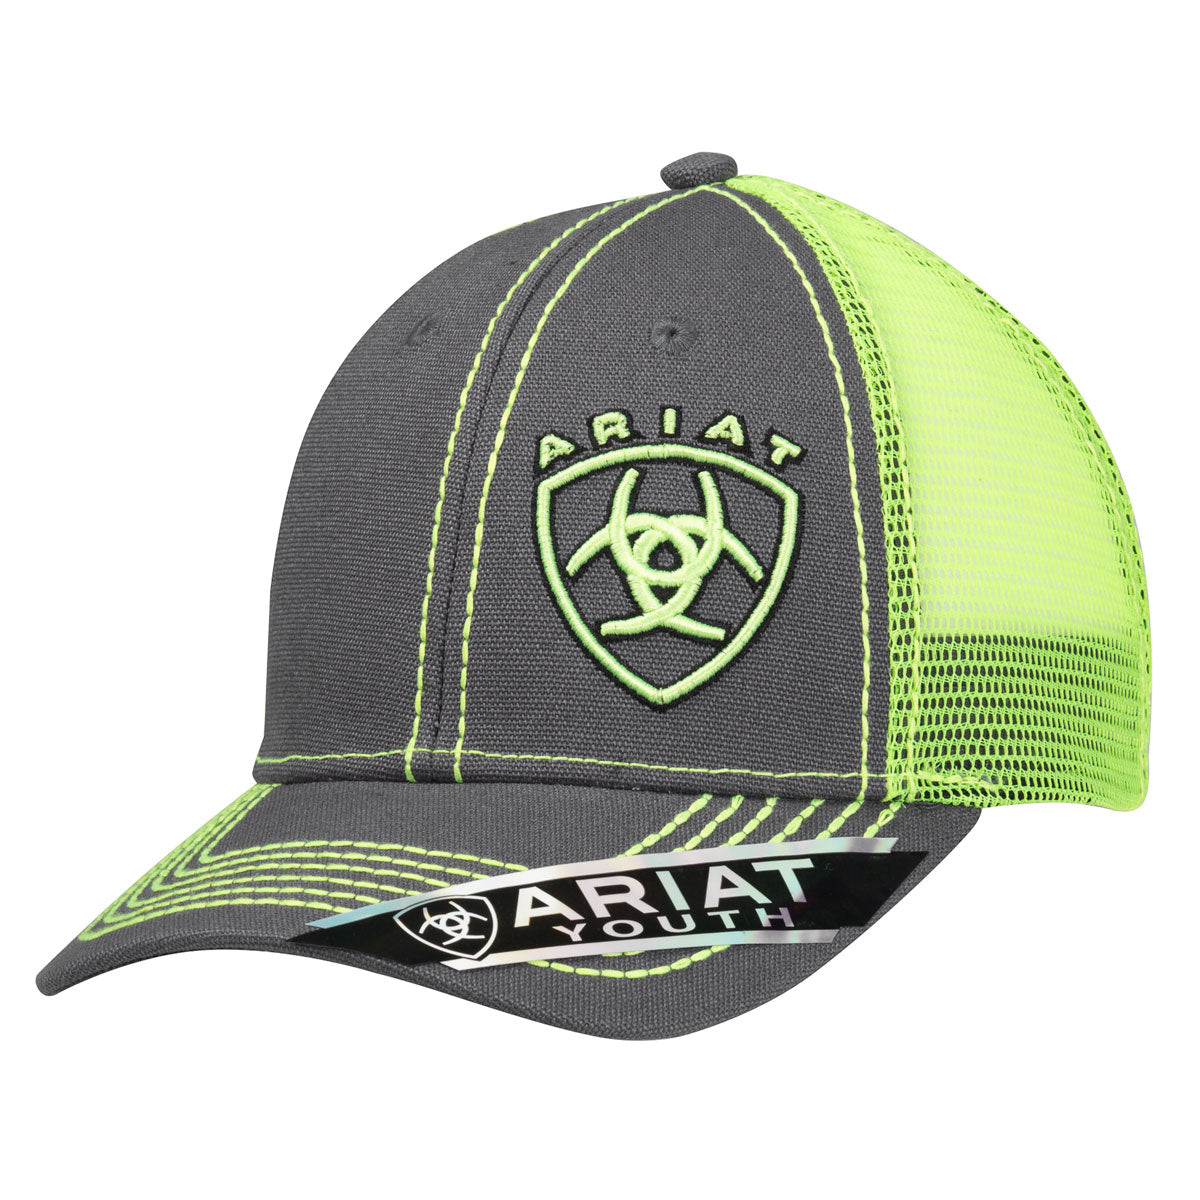 Ariat Youth Mesh Snapback Cap - Grey/Lime